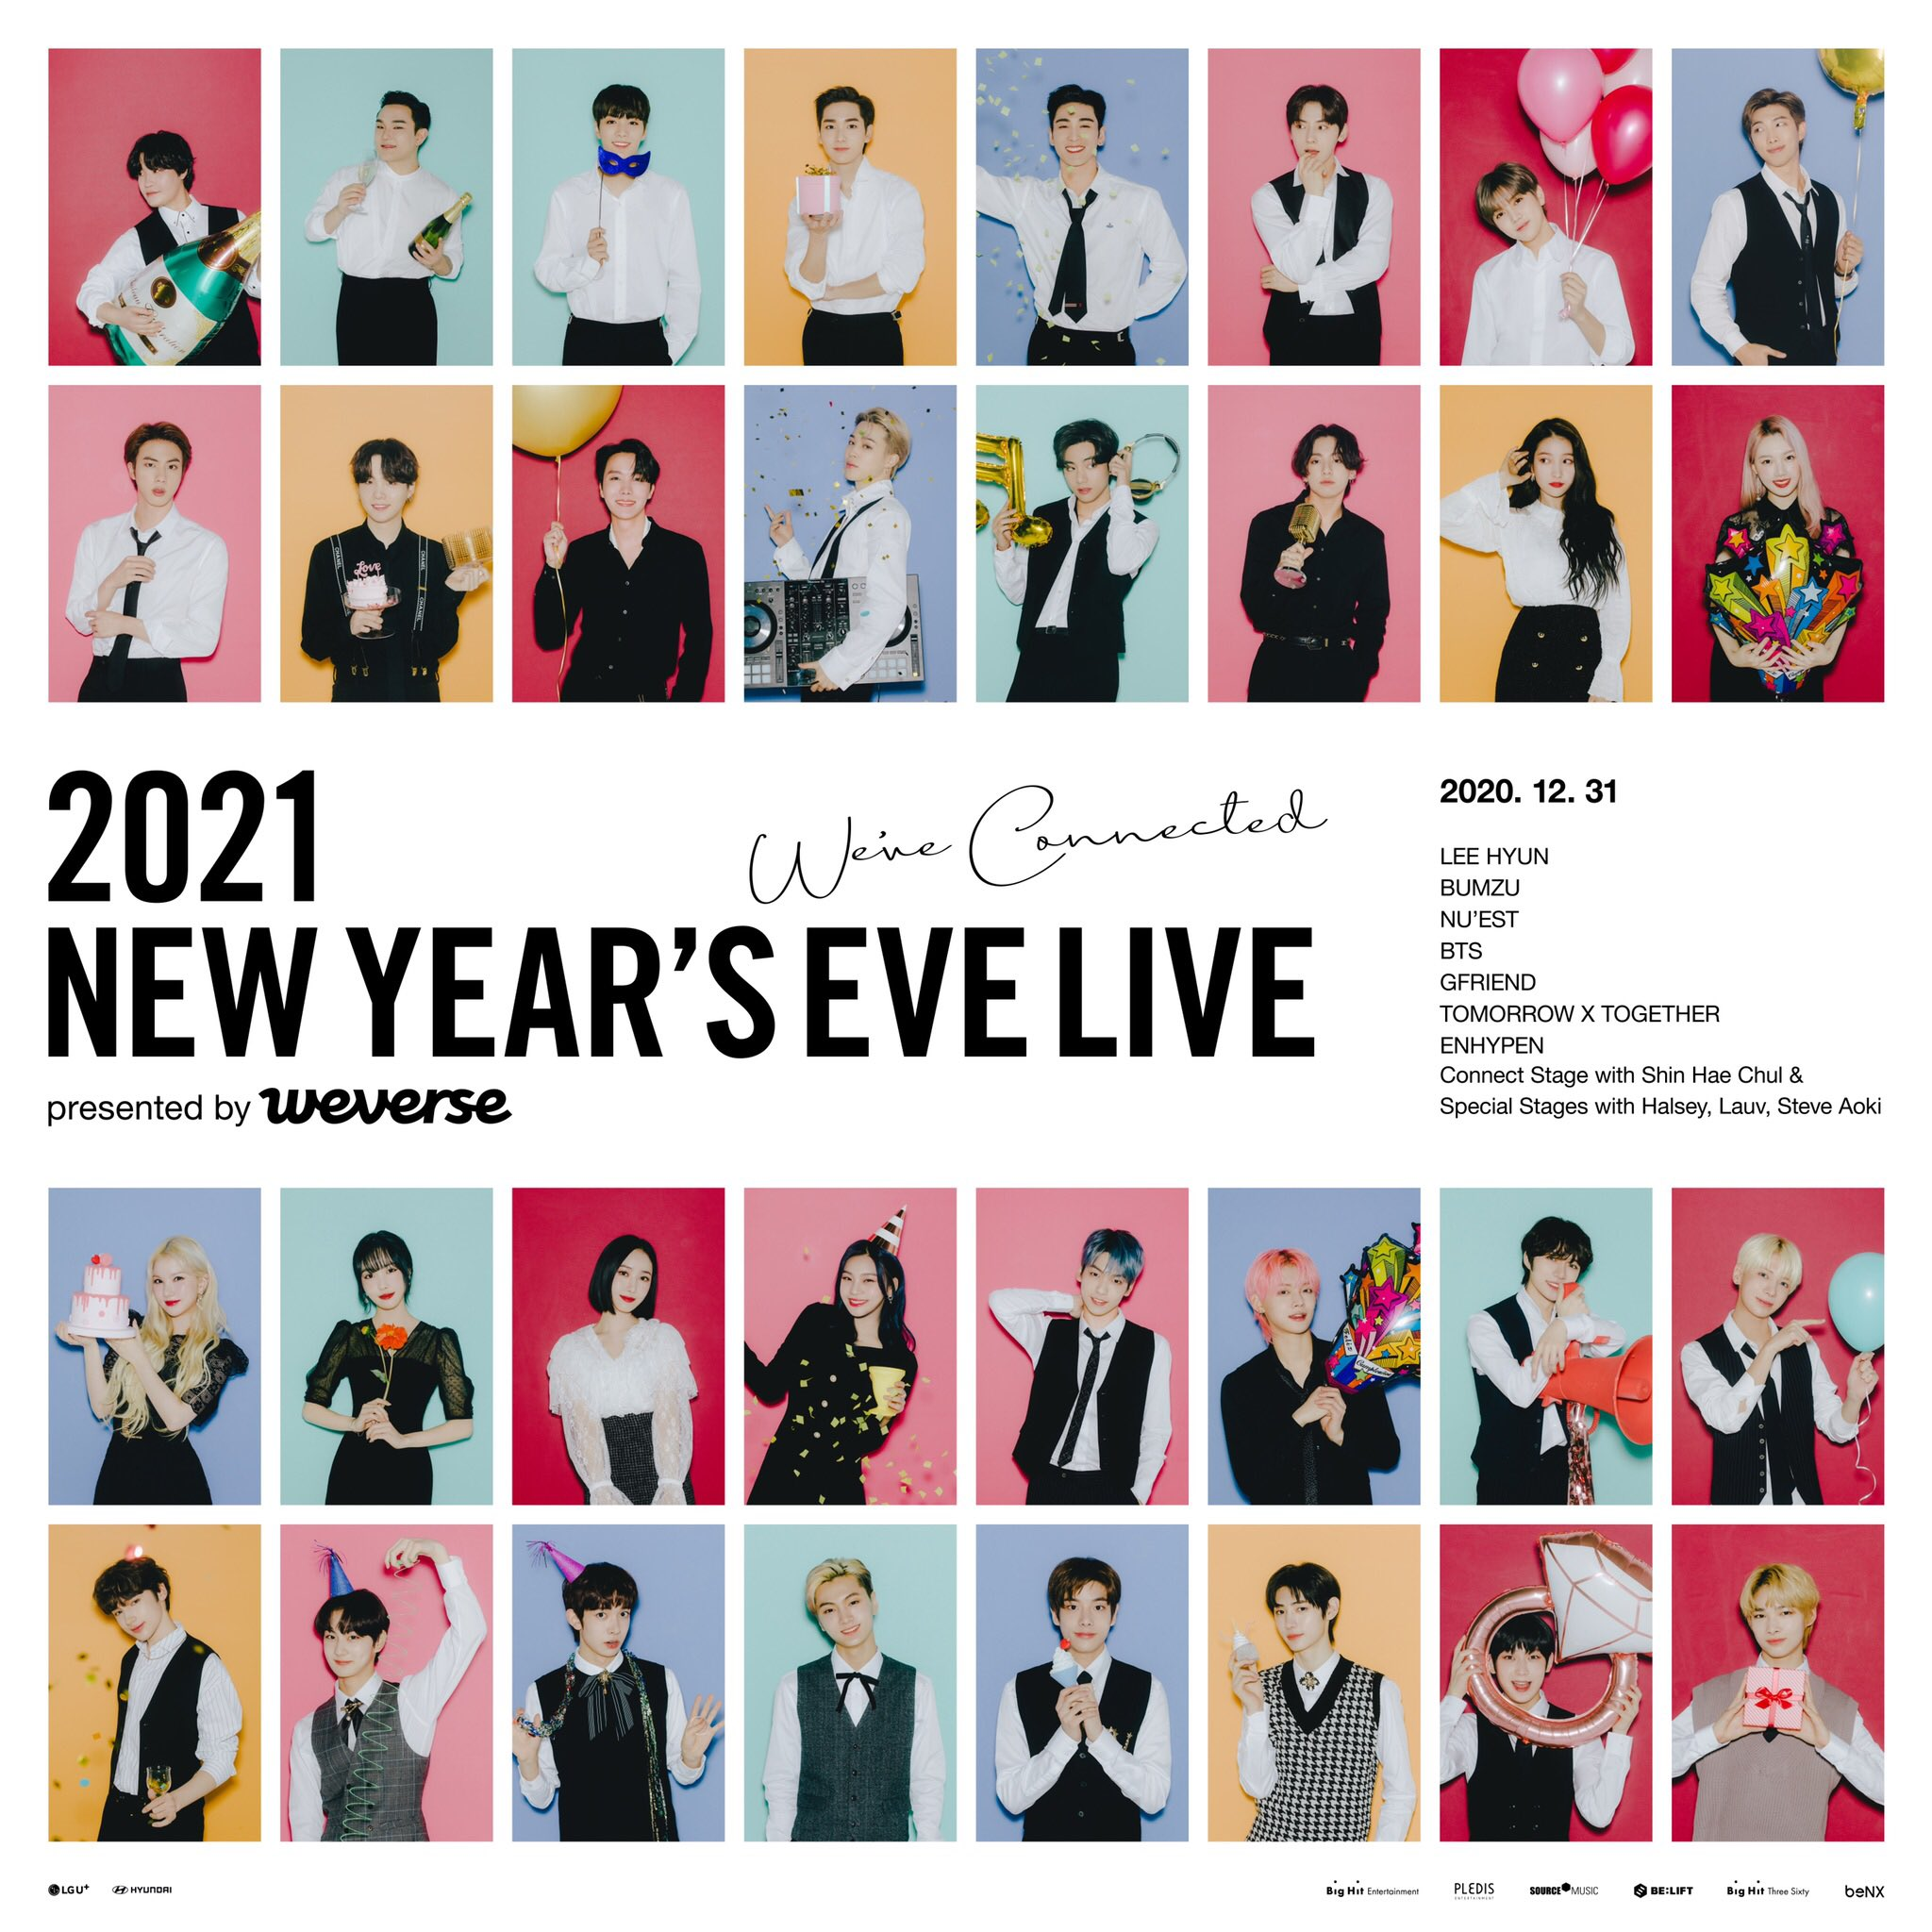 2021 New Year's Eve Live presented by Weverse | BTS Wiki | Fandom